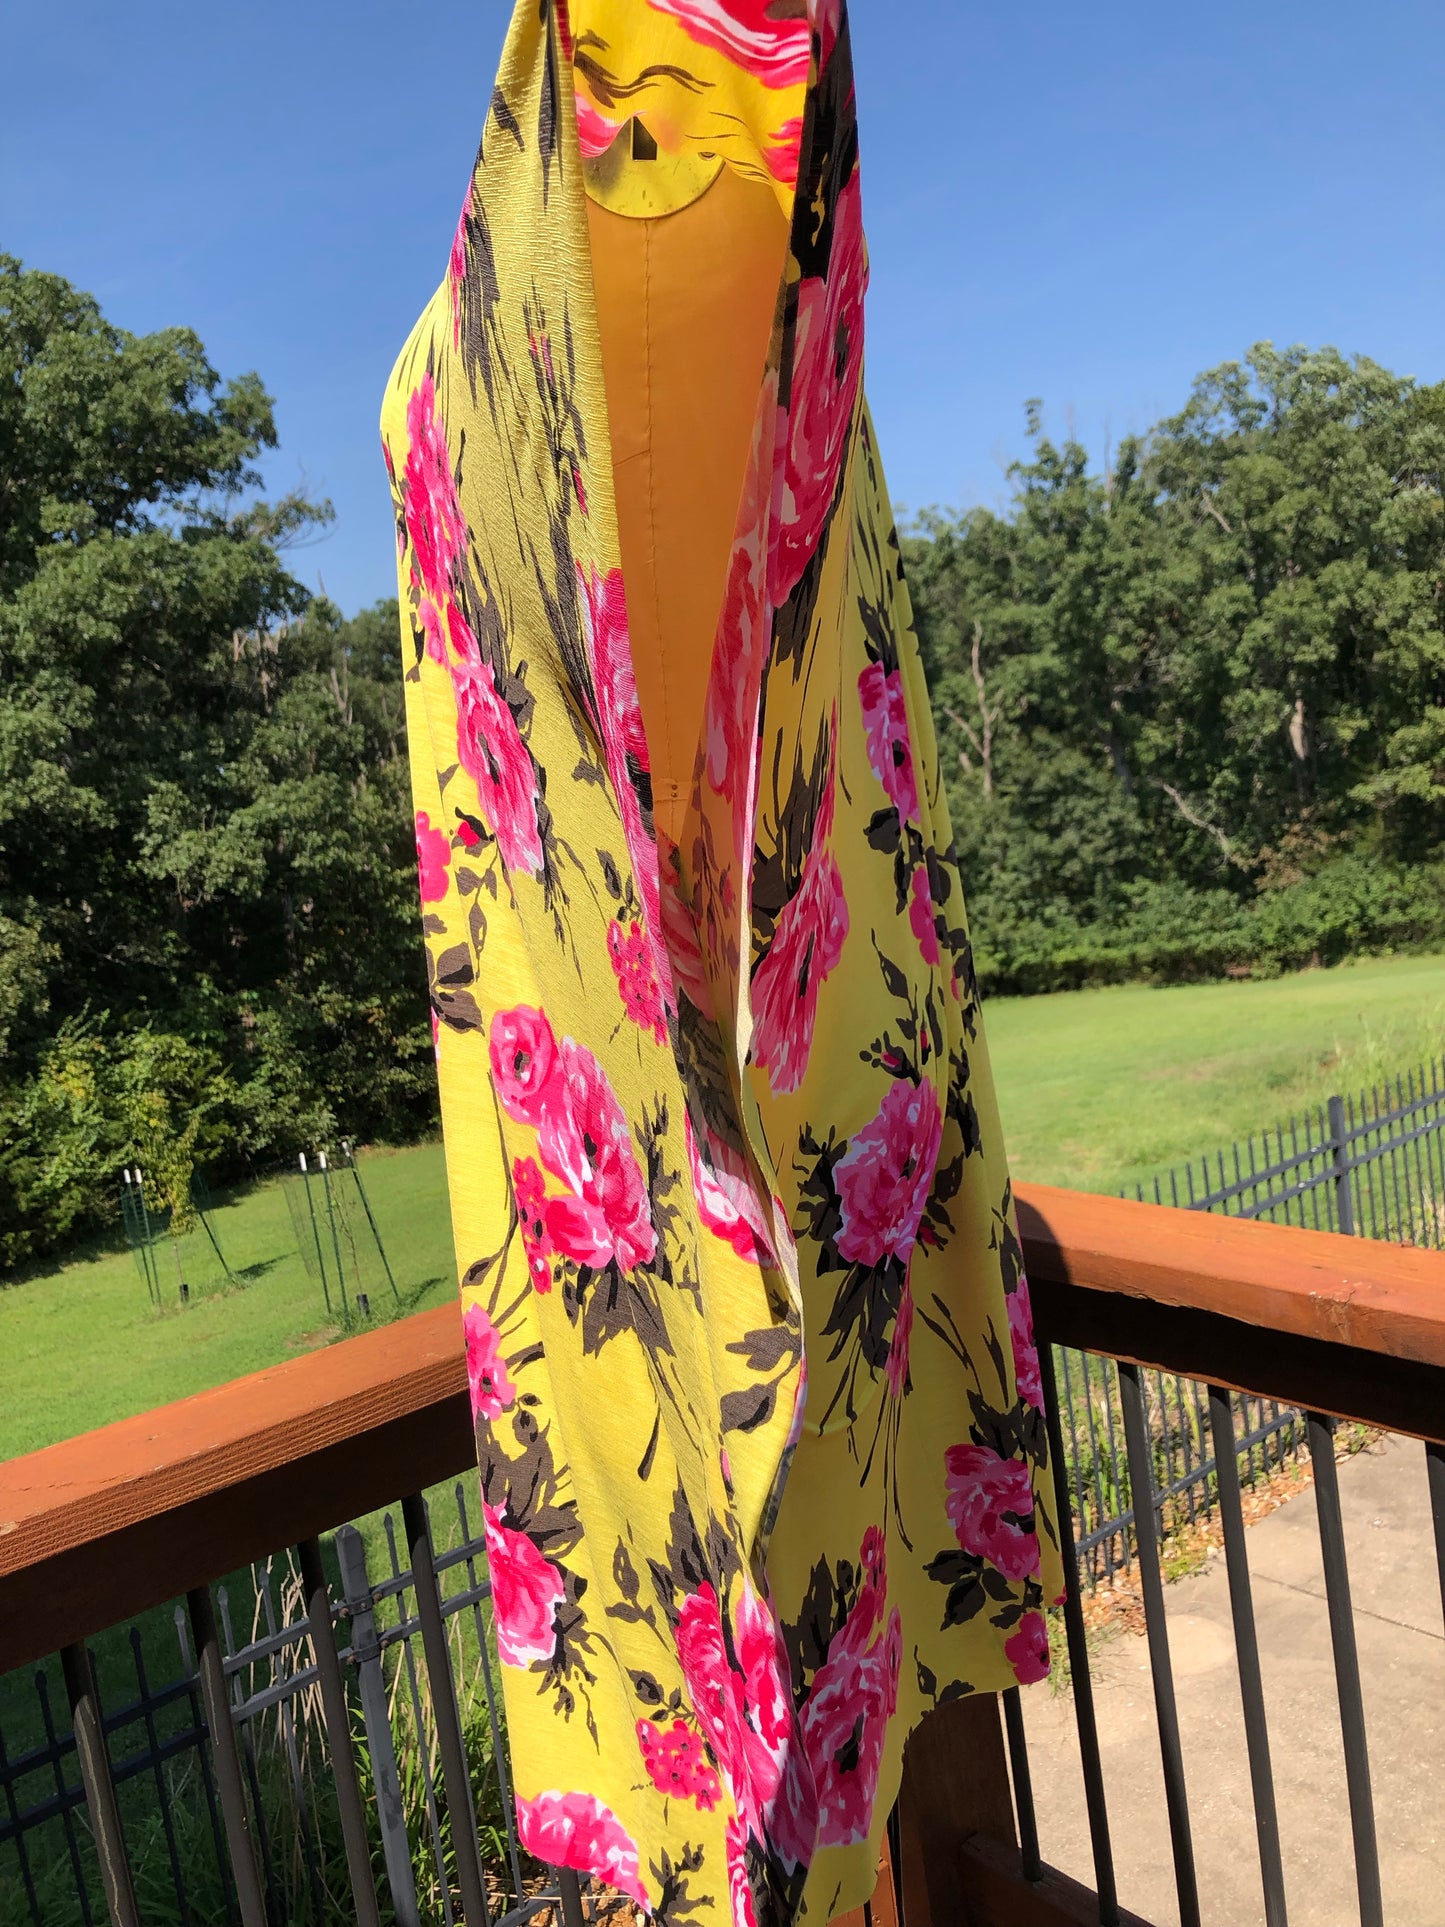 Yellow and Pink Floral Kaftan Knee-Length Dress with Flowy Sleeves - Fits Sizes 8, 10, 12, 14 and 16 - Only ONE Available